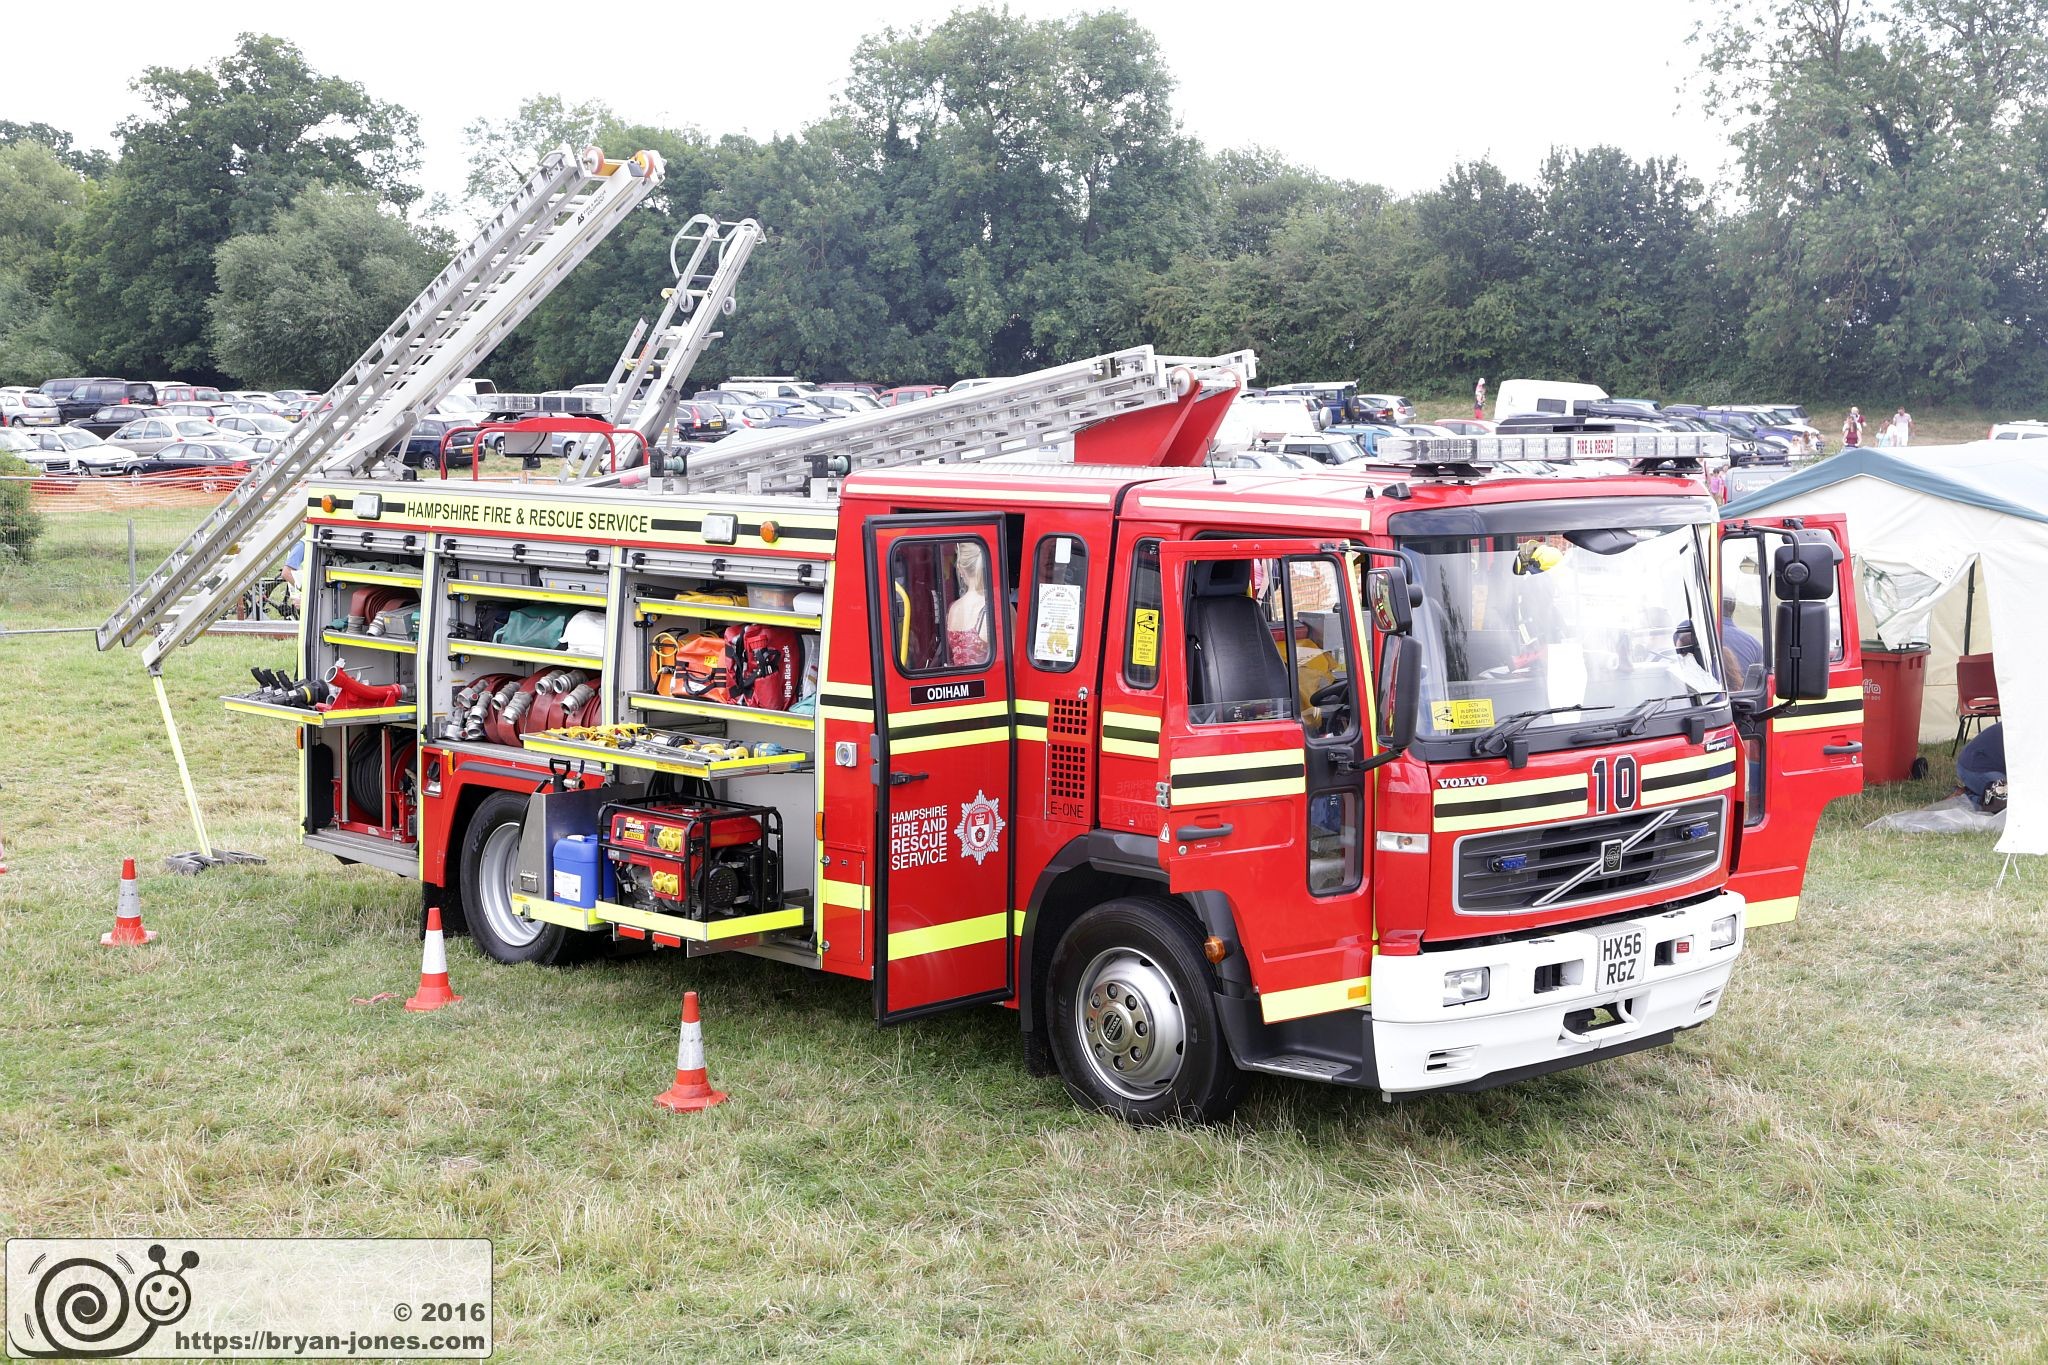 2016 Odiham Fire Show 07-Aug-2016. Hampshire Fire and Rescue Volvo Emergency One fire appliance. HX56RGZ